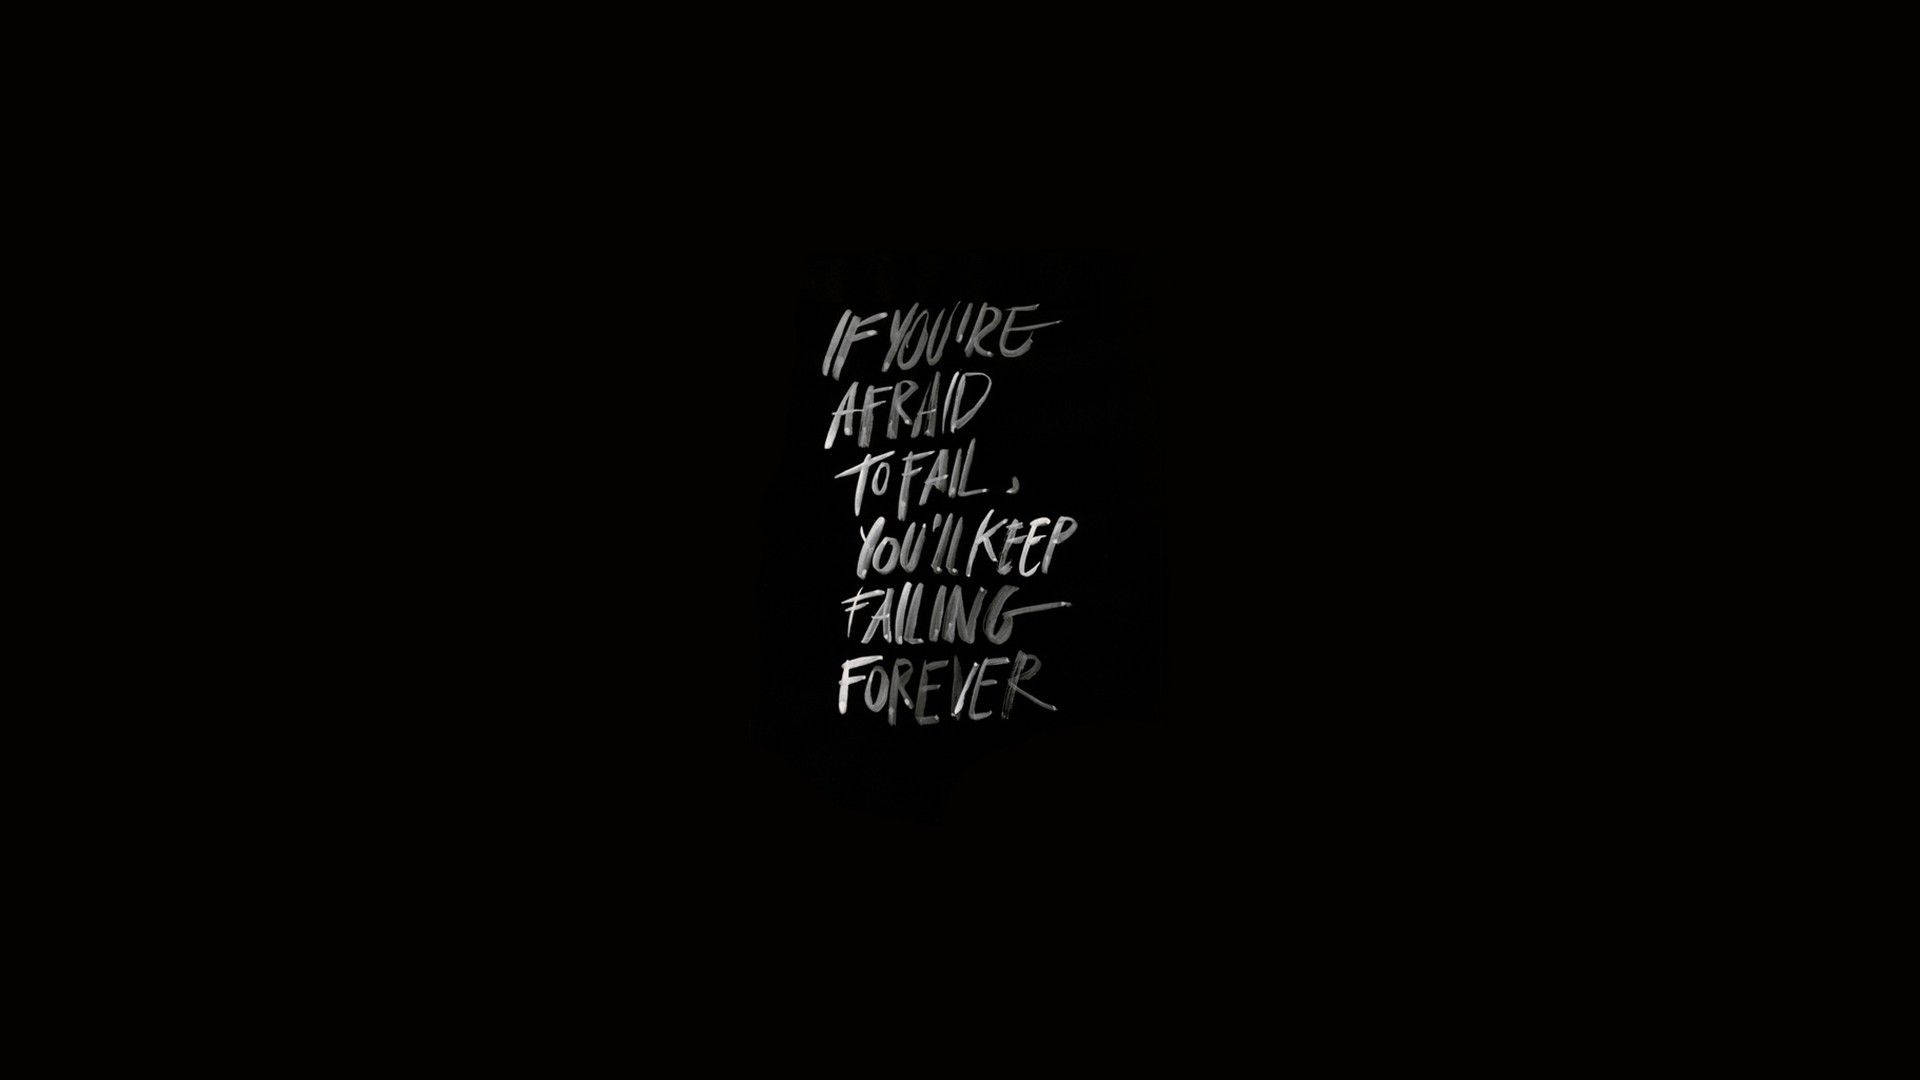 Free Dark Quotes Wallpaper Downloads, [100+] Dark Quotes Wallpapers for  FREE 